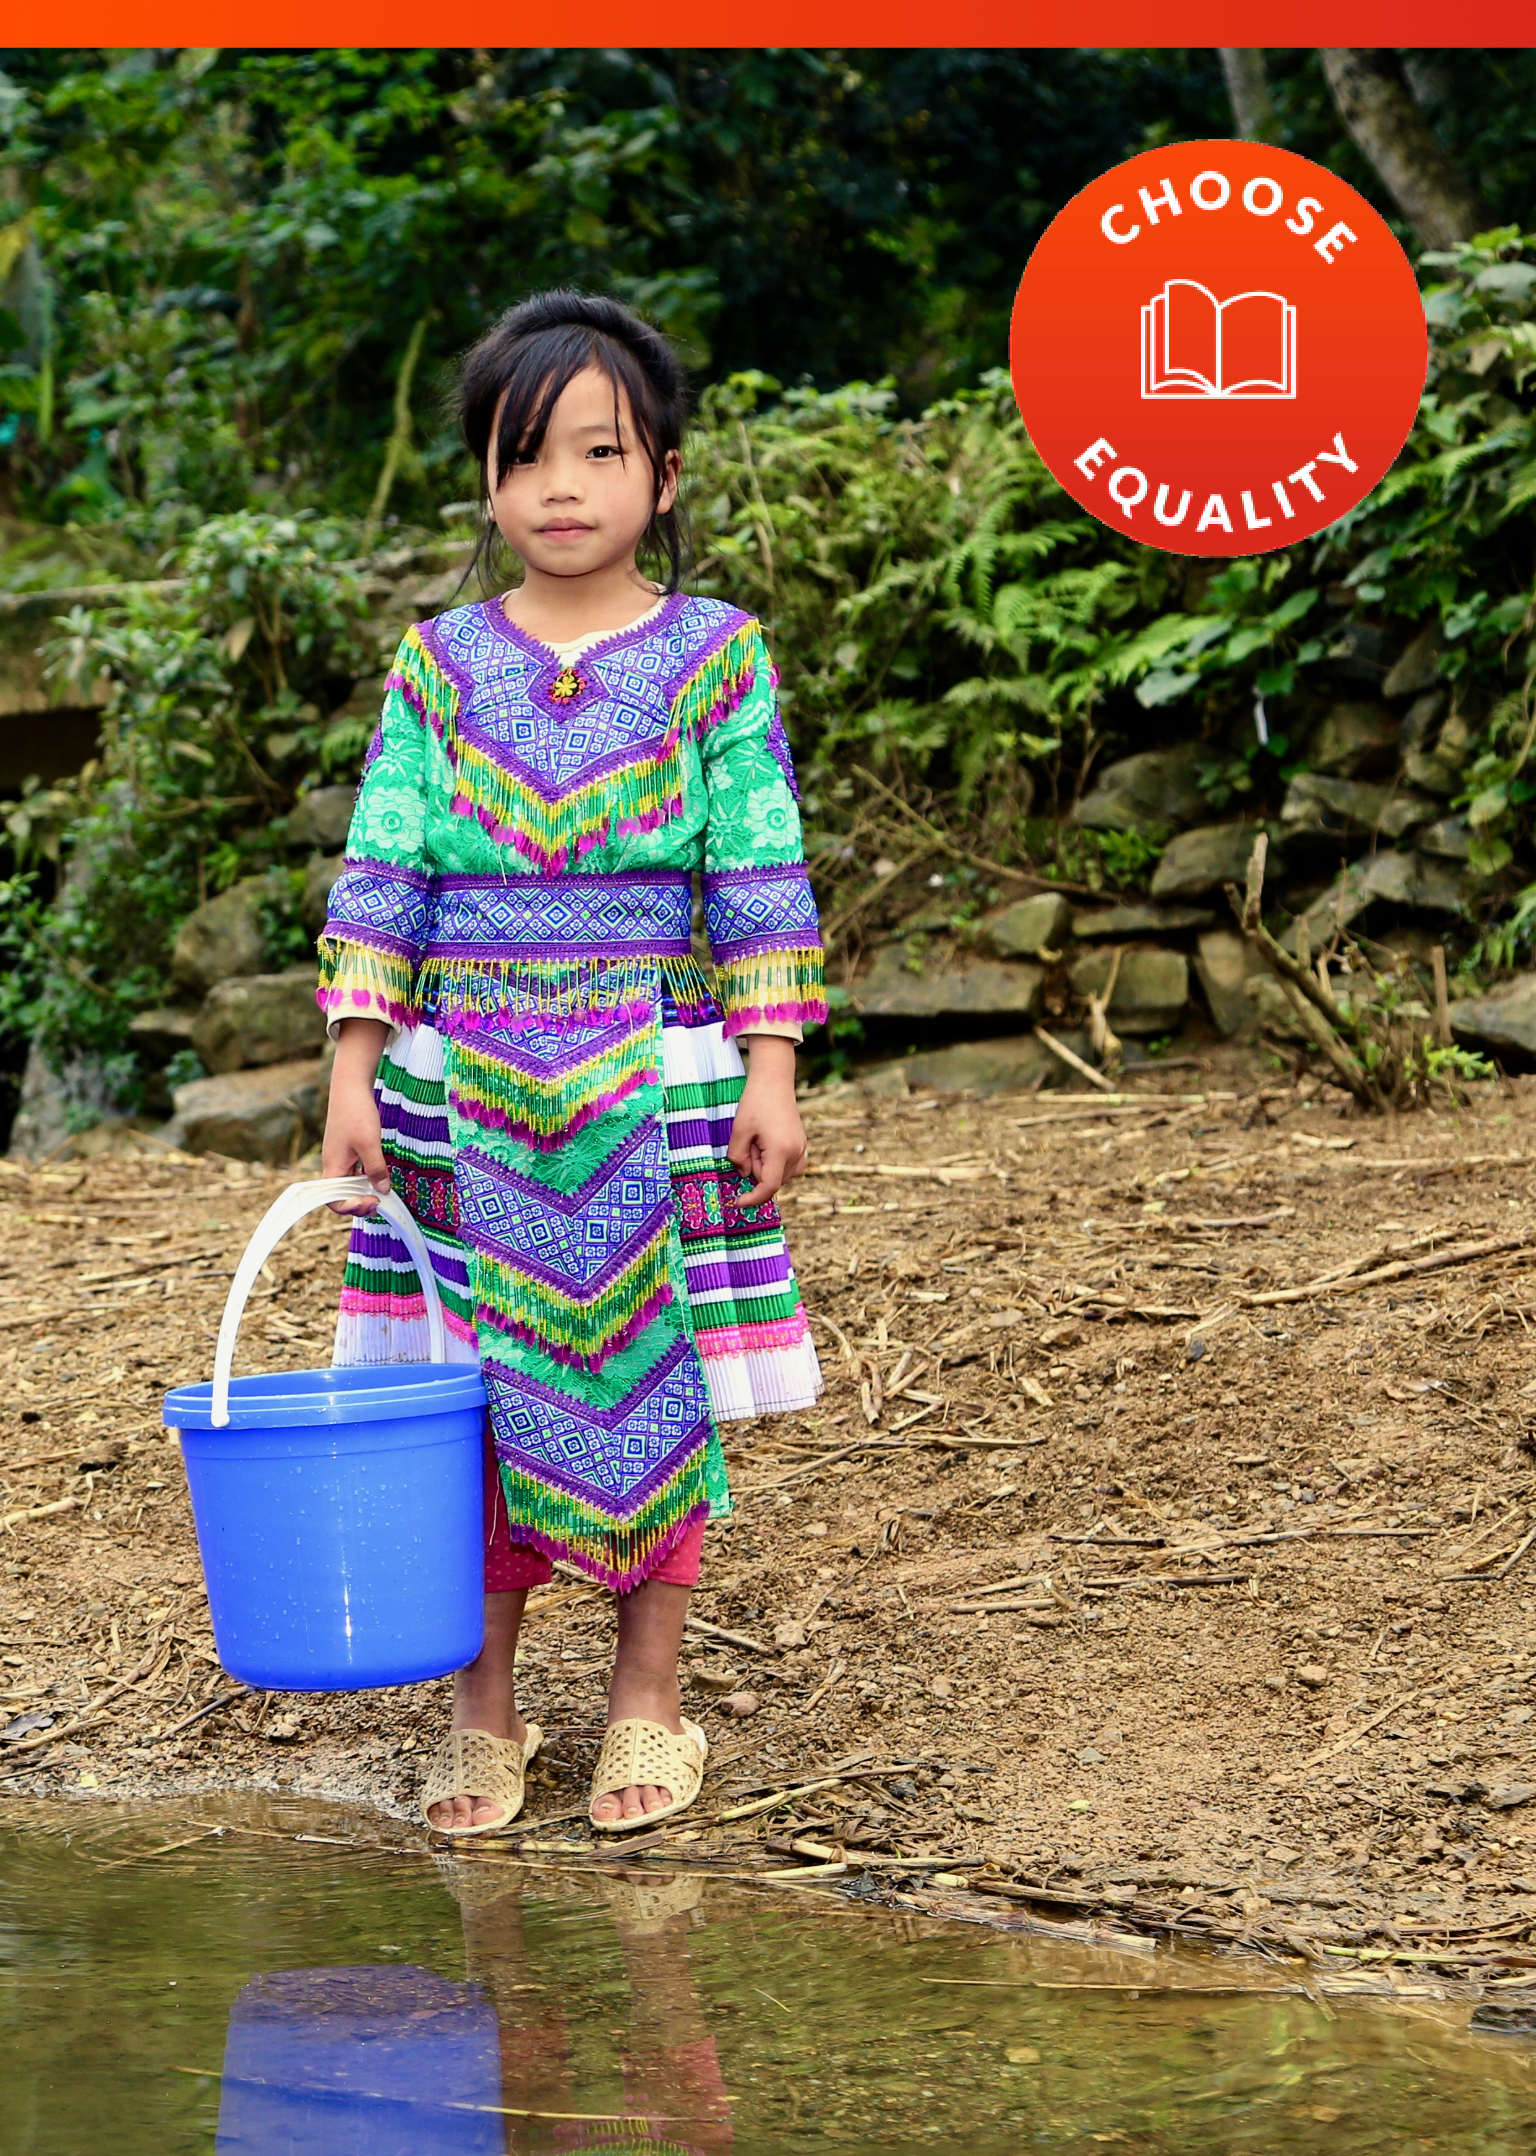 Choose Equality - Child in a colorful dress stands near water with a bucket